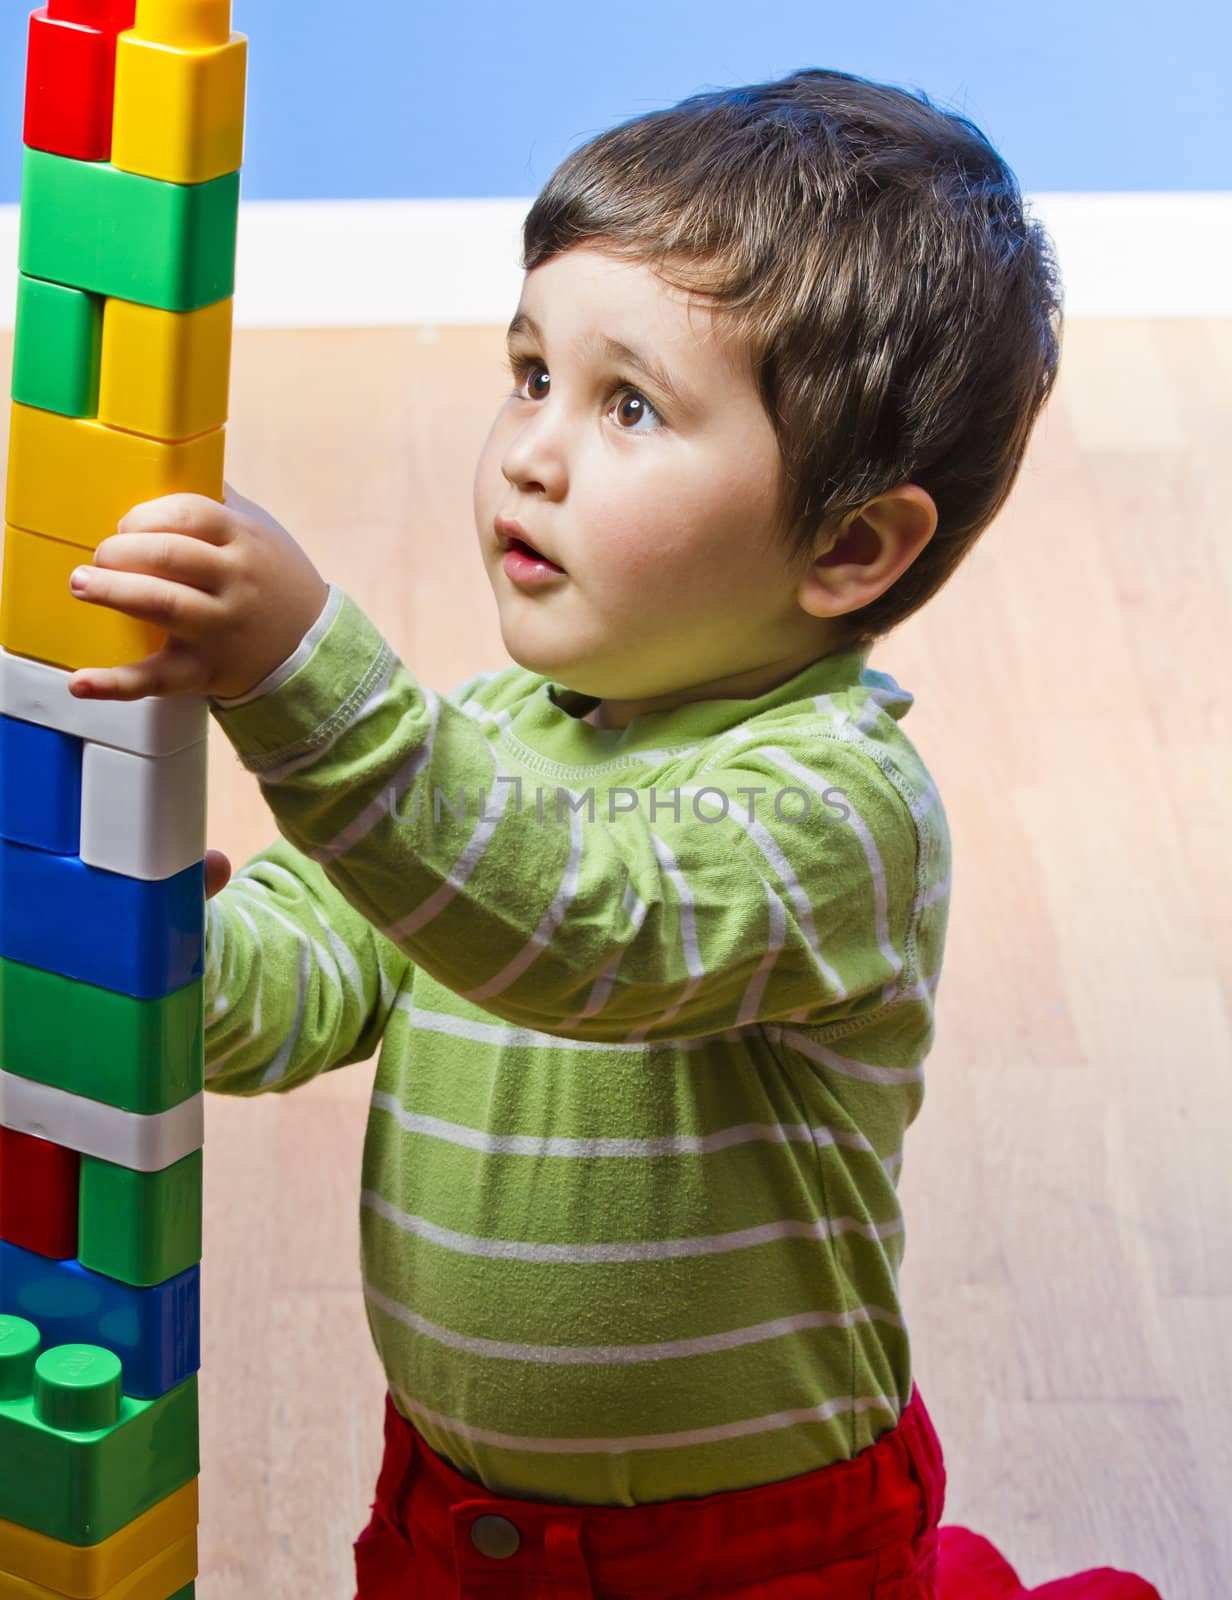 Cute little brunette baby playing with colorful blocks